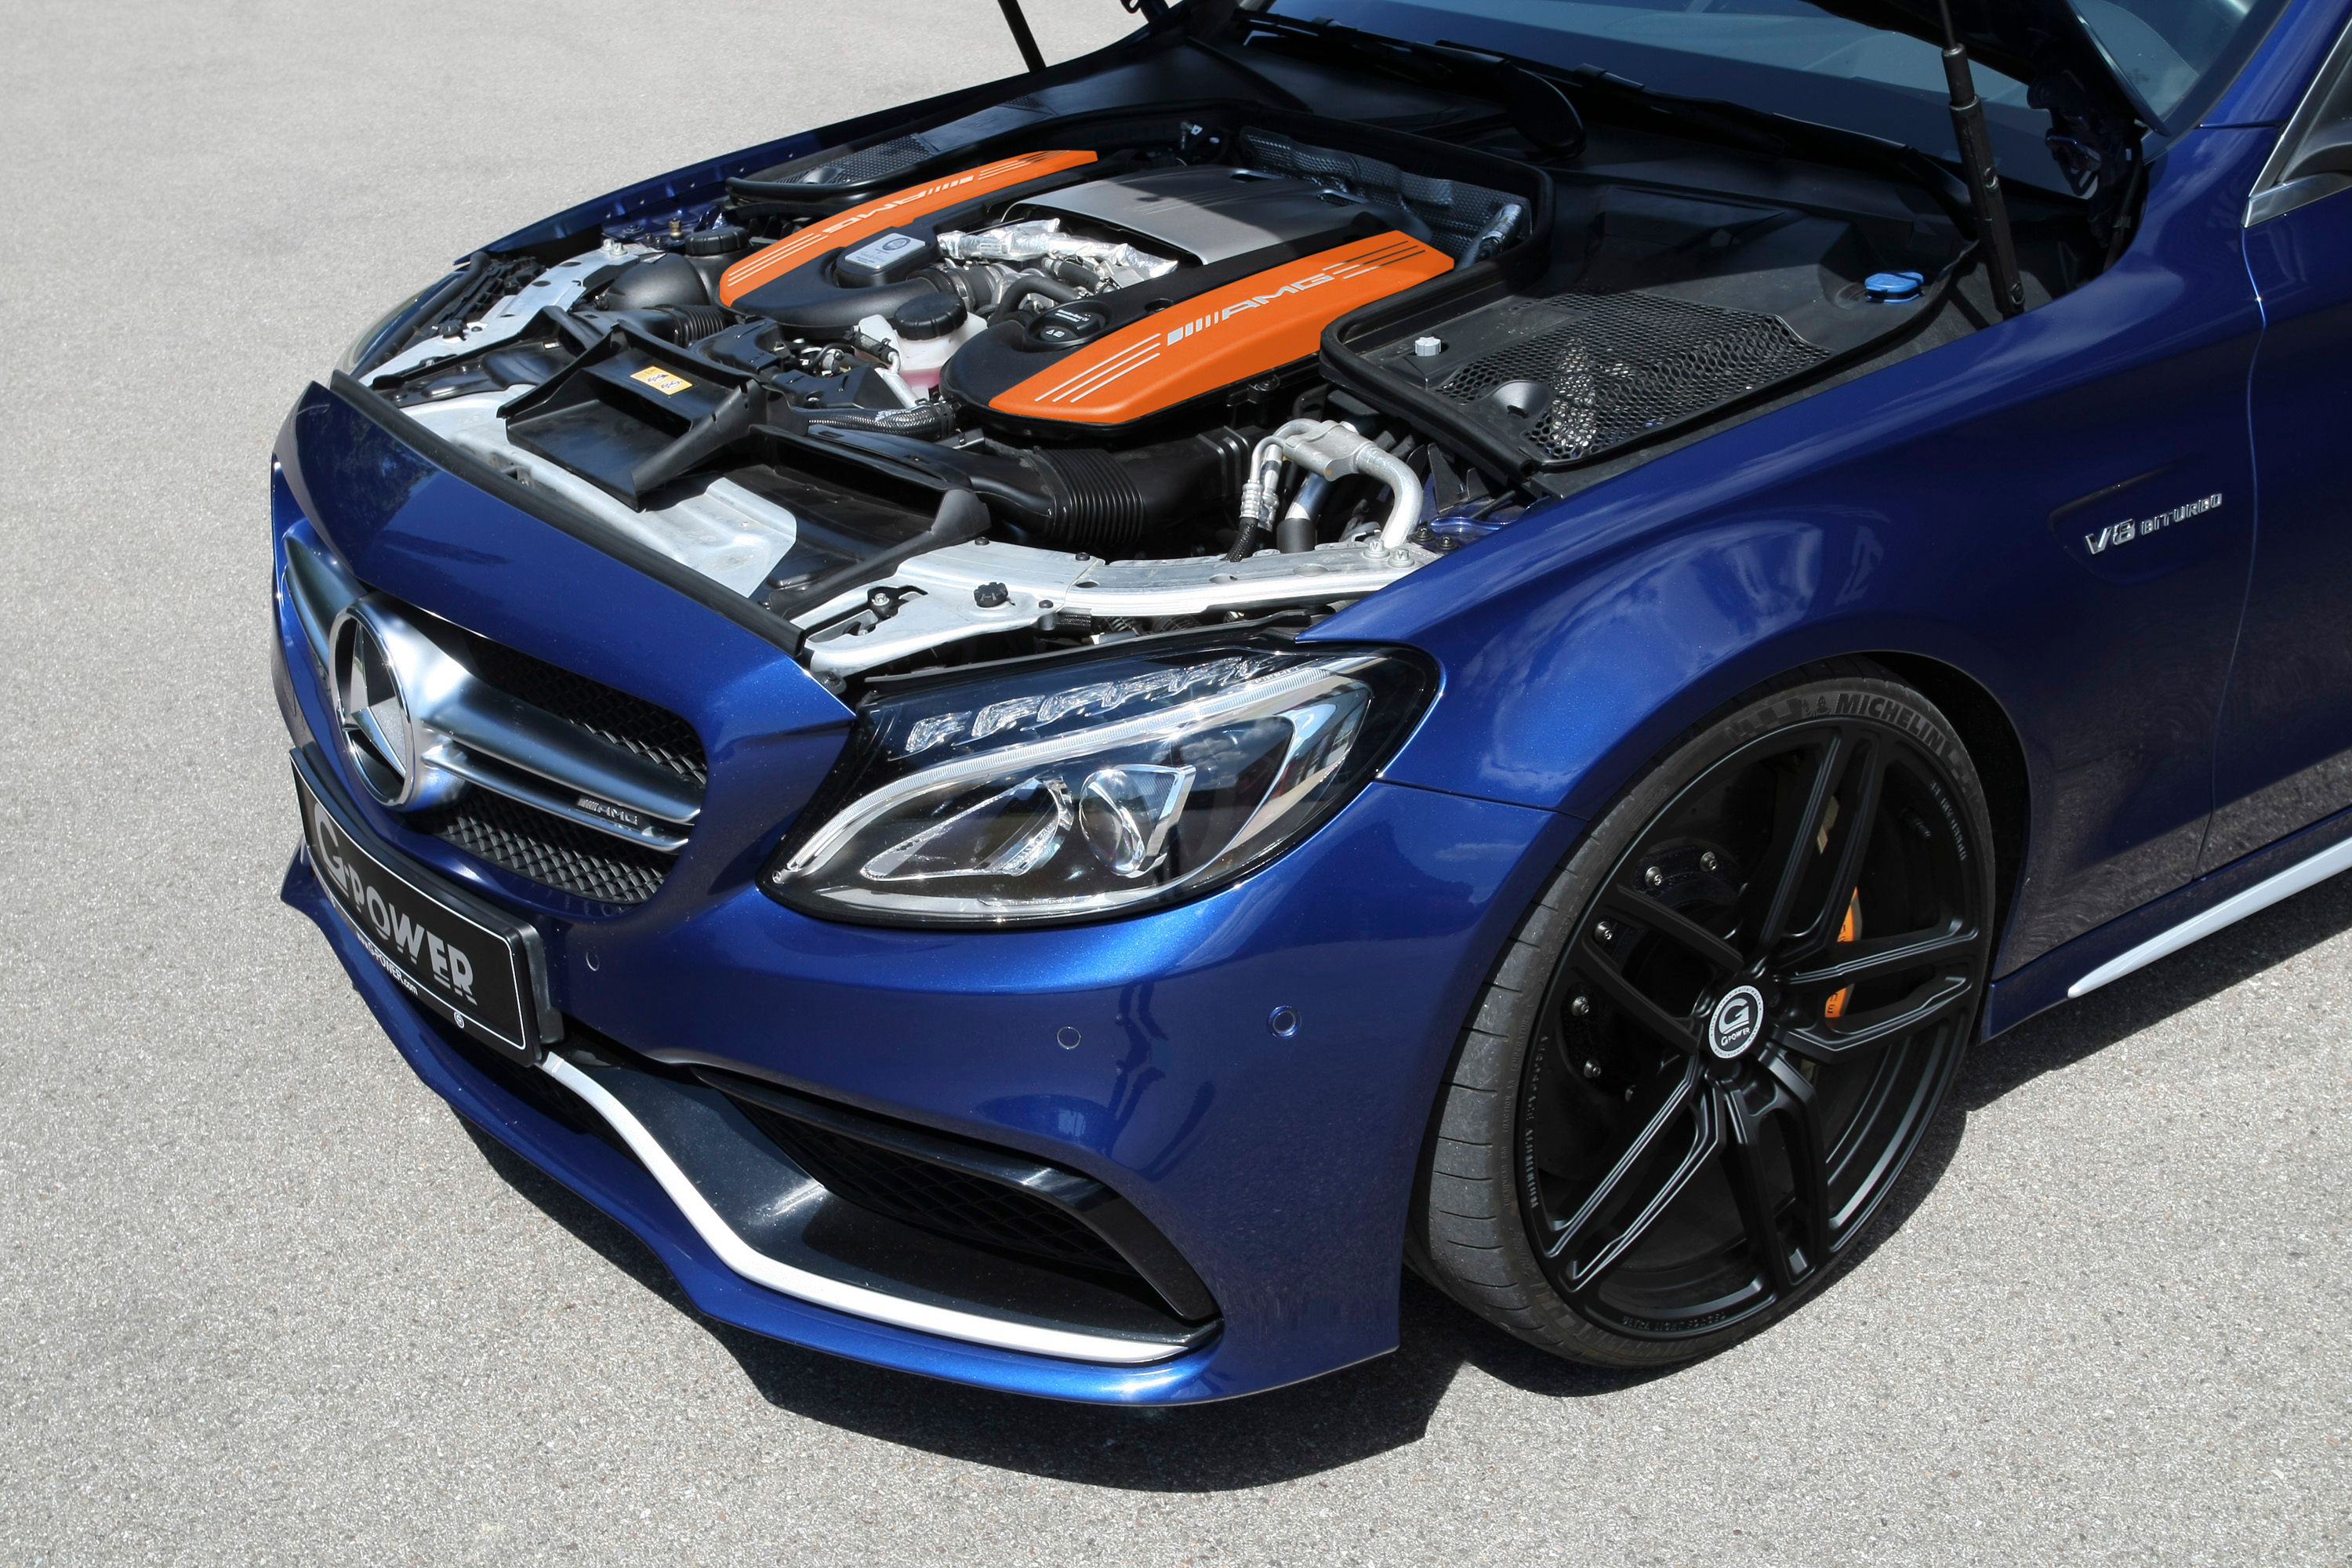 2018 Mercedes-AMG C63 S by G-Power